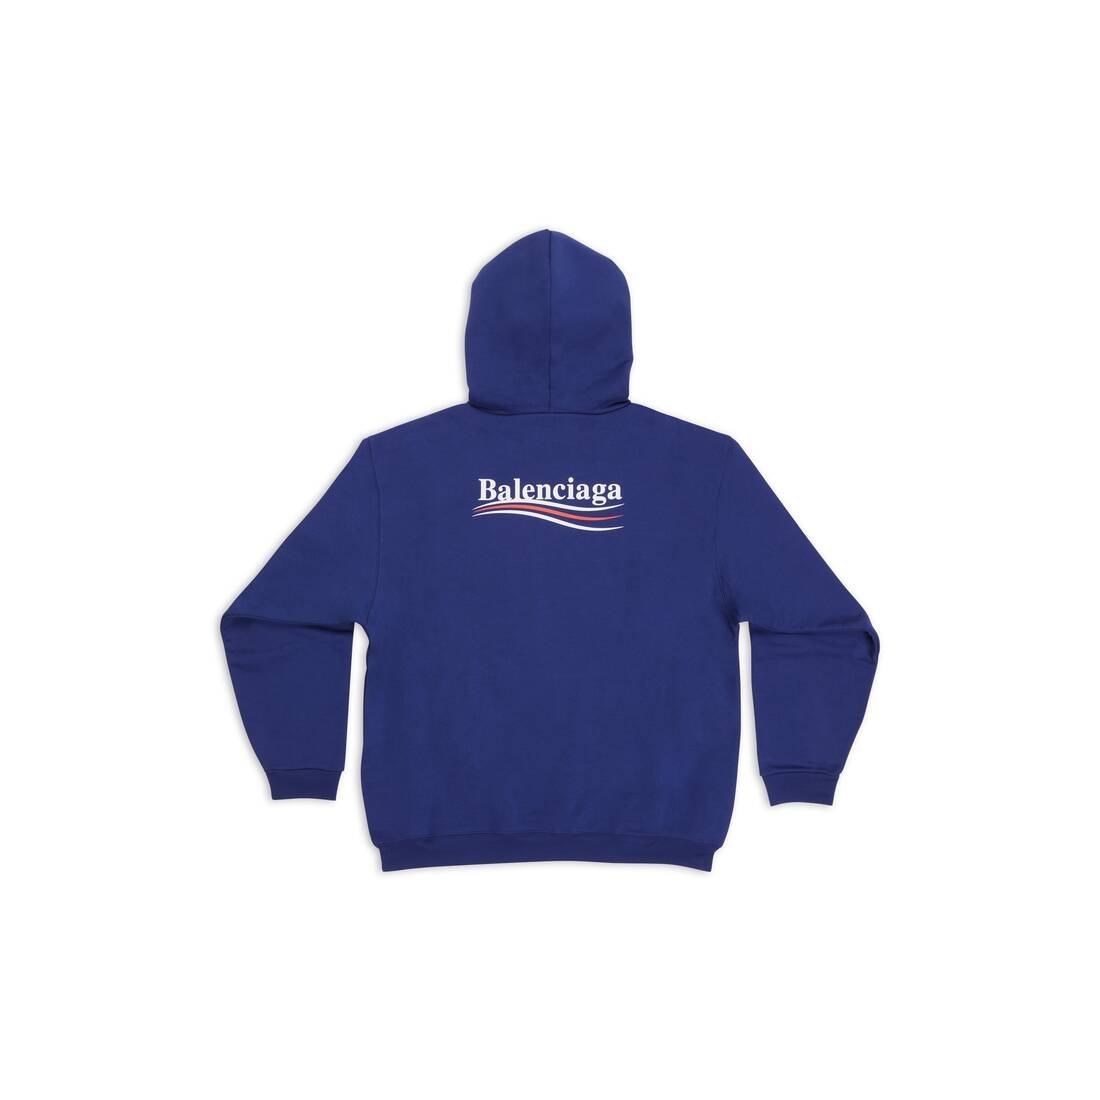 Men's Political Campaign Hoodie Medium Fit in Pacific Blue/white - 6